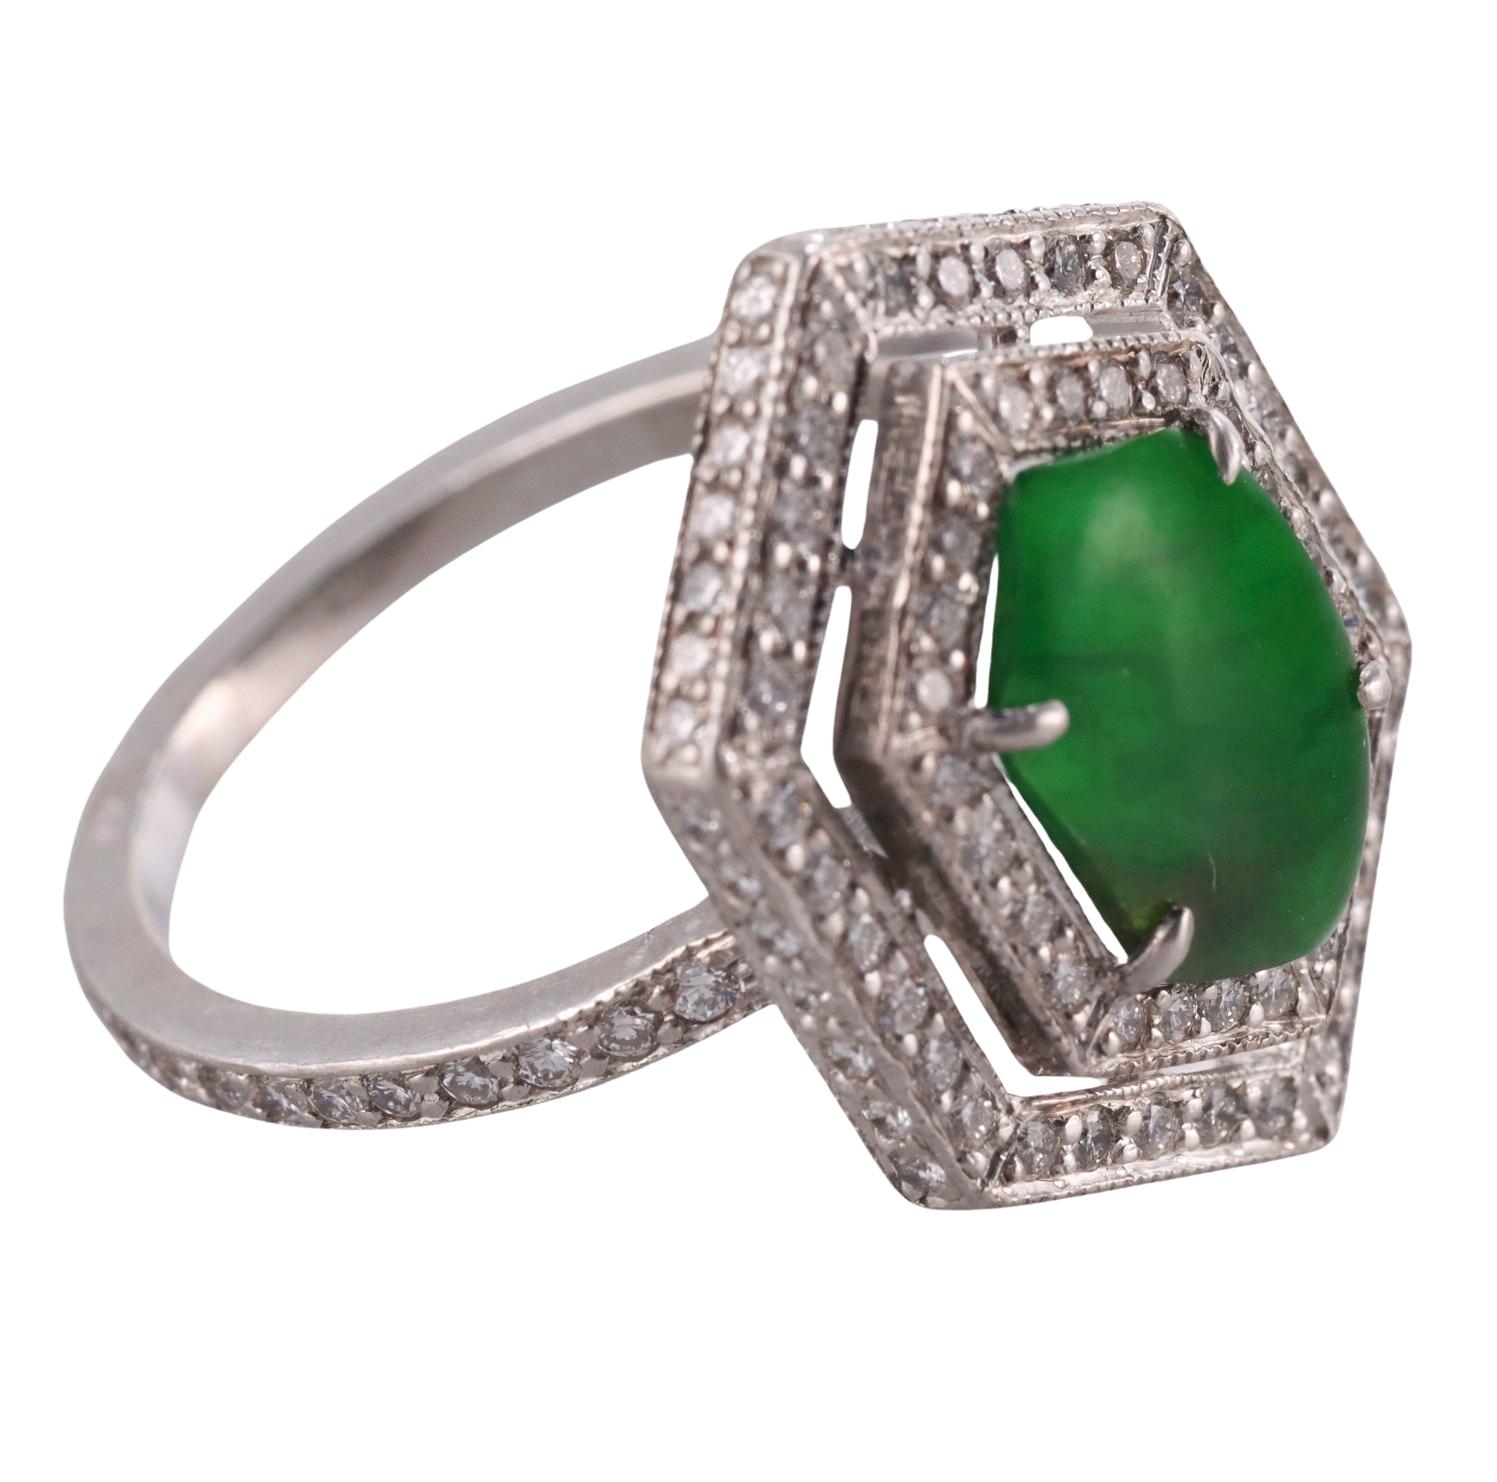 Exquisite and delicate creation by Fred Leighton, set in platinum, the ring features center 10.7 x 7.2mm jade, surrounded with approx. 0.60ctw G/VS diamonds. Ring size 6, top is 20mm x 15mm. Marked pt850, Fred Leighton. Weight - 7.1 grams. 